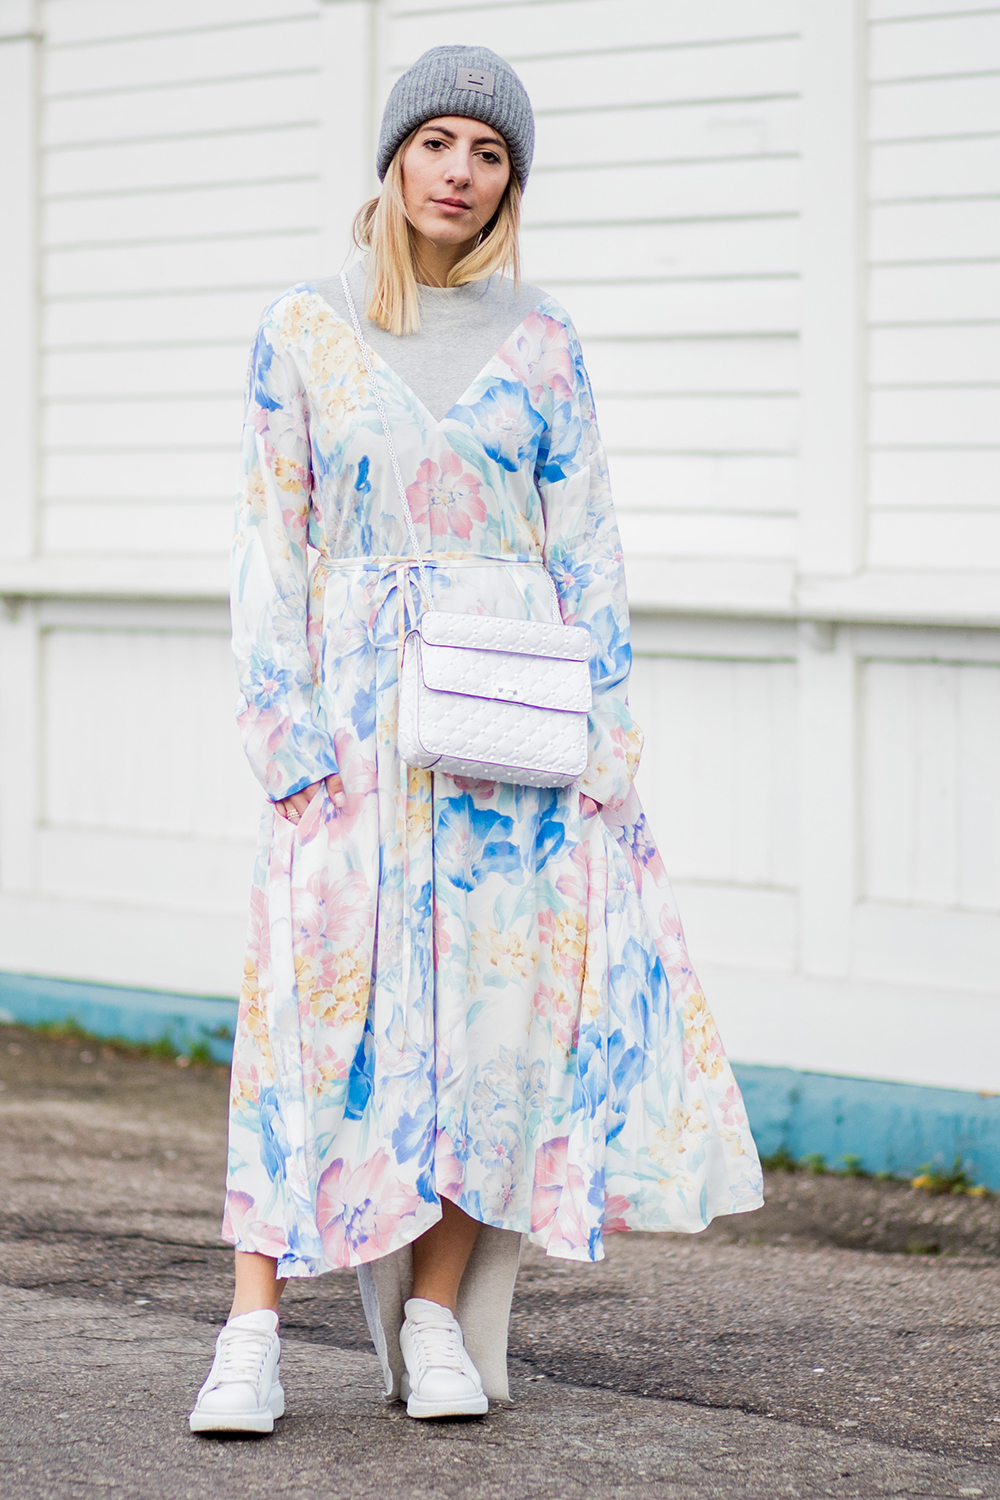 Best Dresses Street Style: 50 Images You Need to See | Who What Wear UK